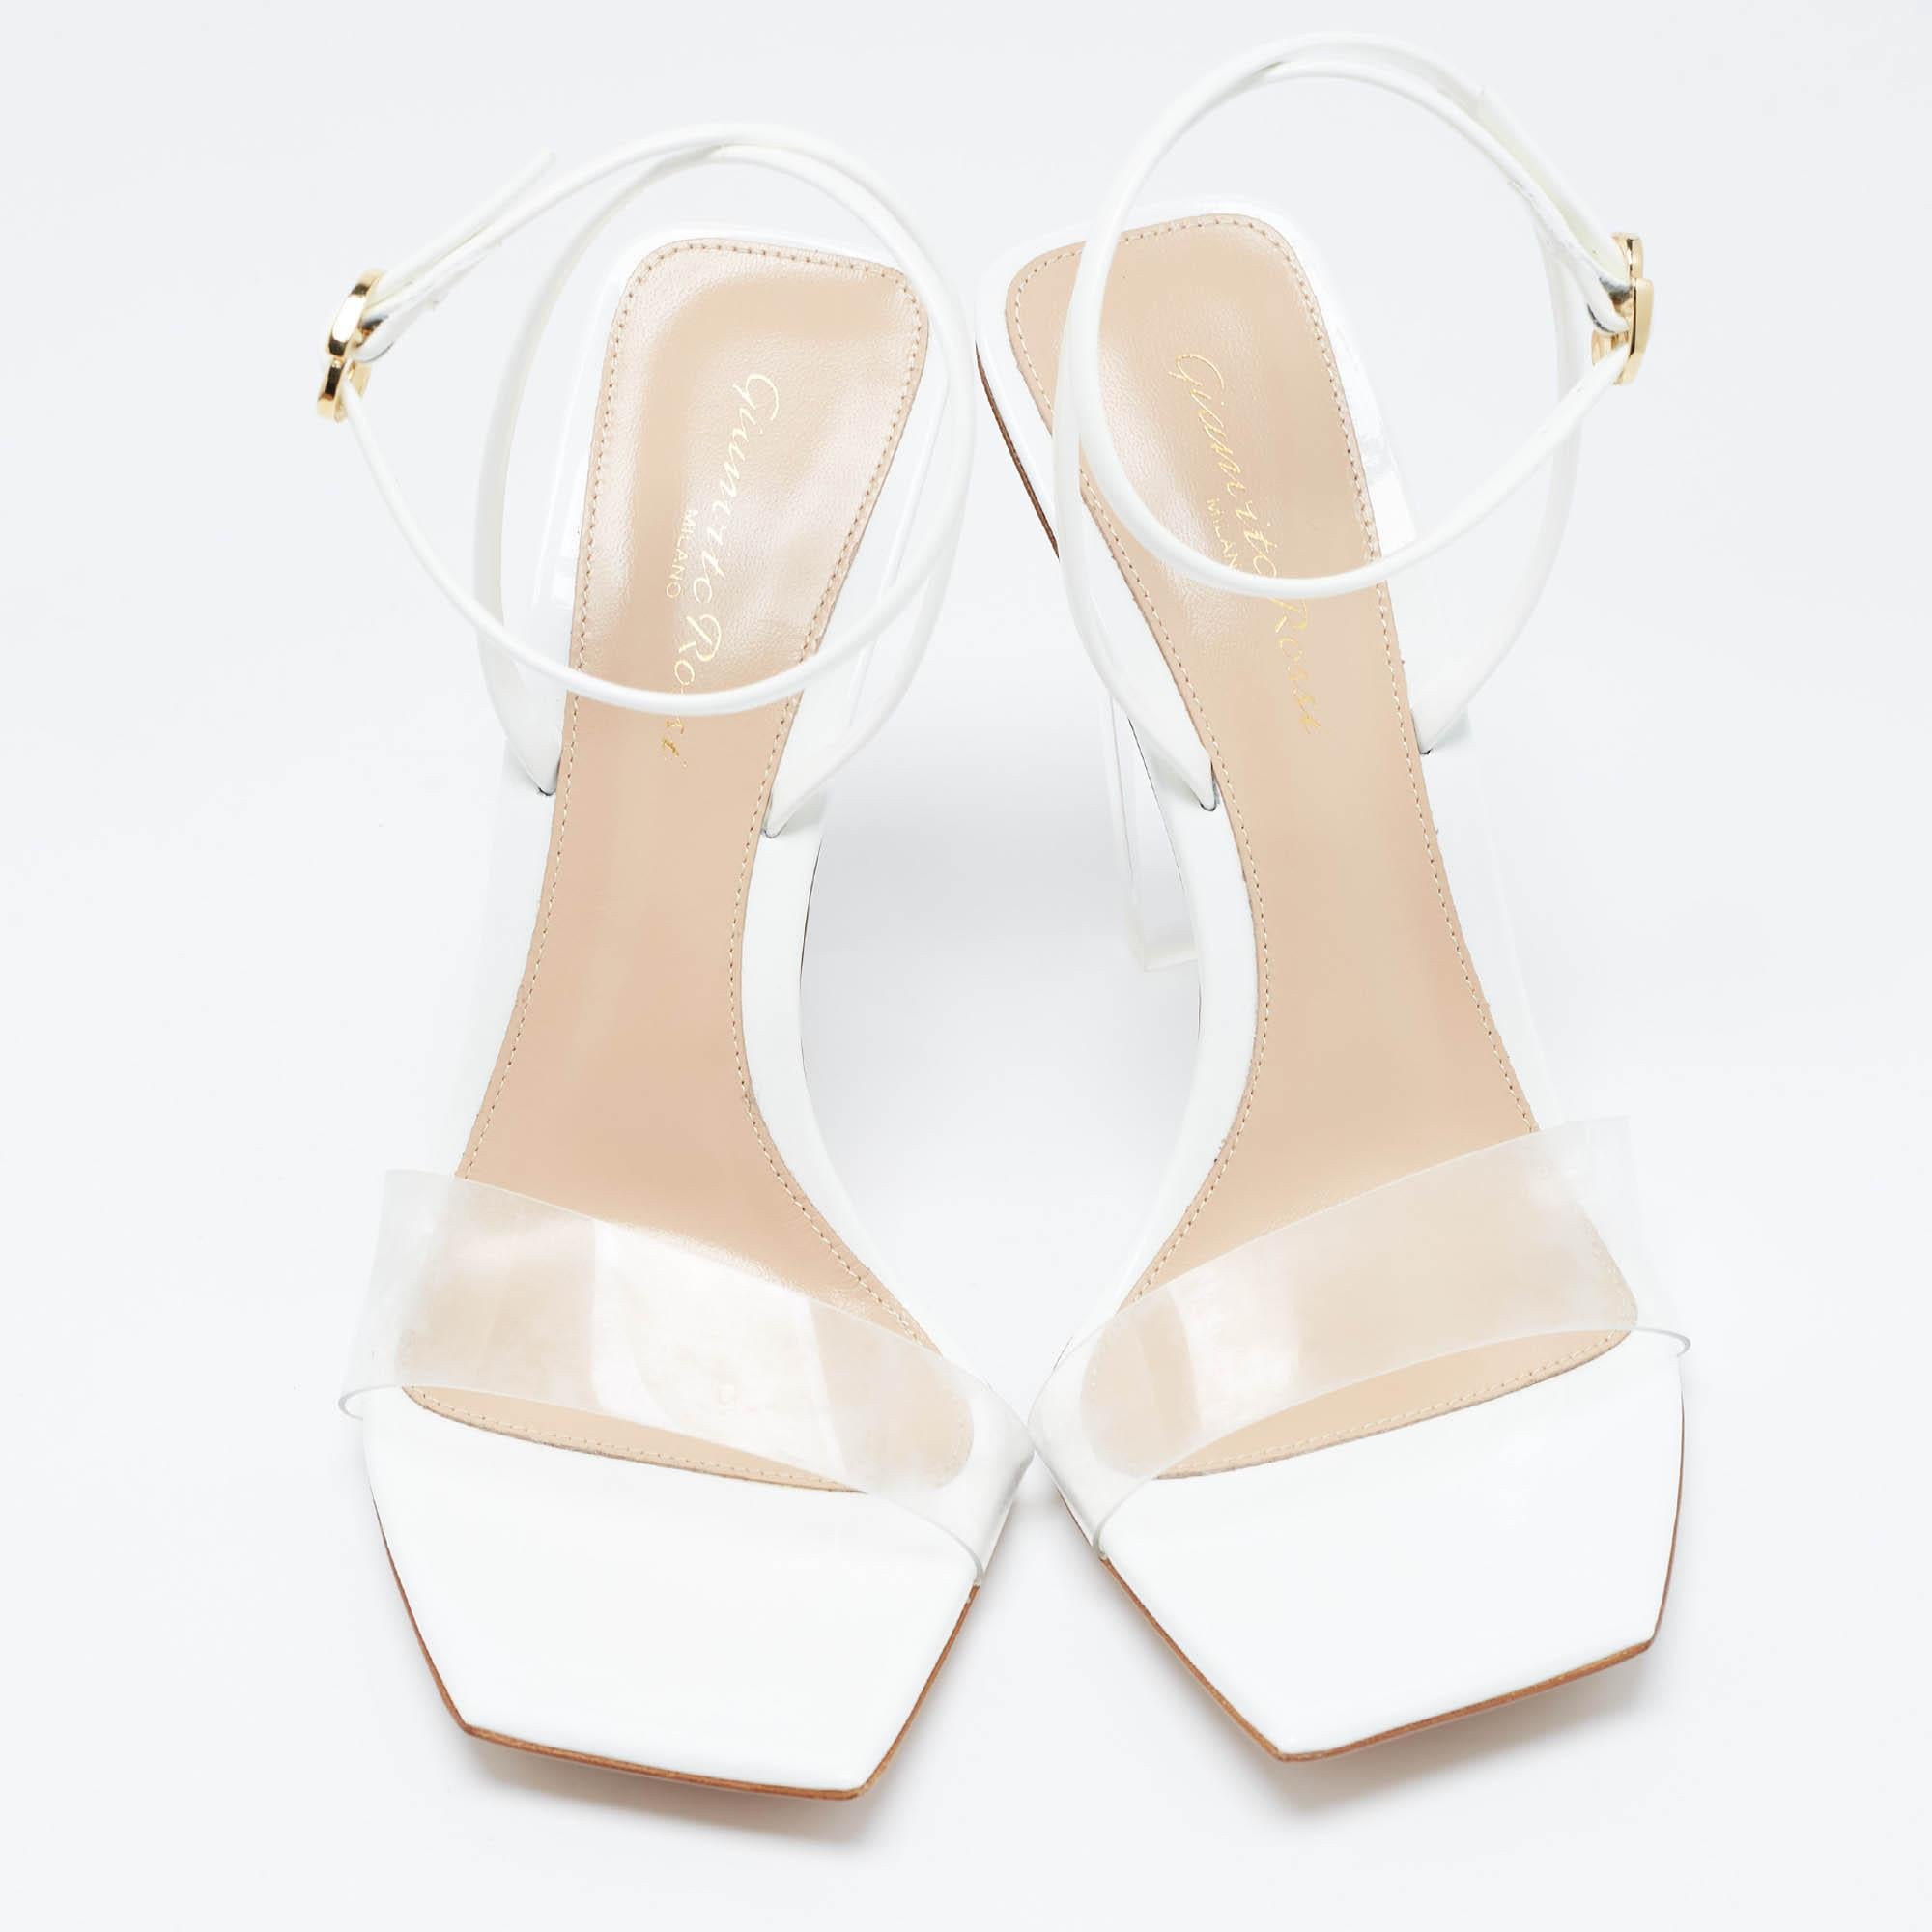 Crafted by Gianvito Rossi, the Odyssey sandals epitomize modernity. The blend of patent leather and transparent PVC creates an illusion of weightlessness, while the sleek silhouette exudes understated elegance. These sandals effortlessly elevate any